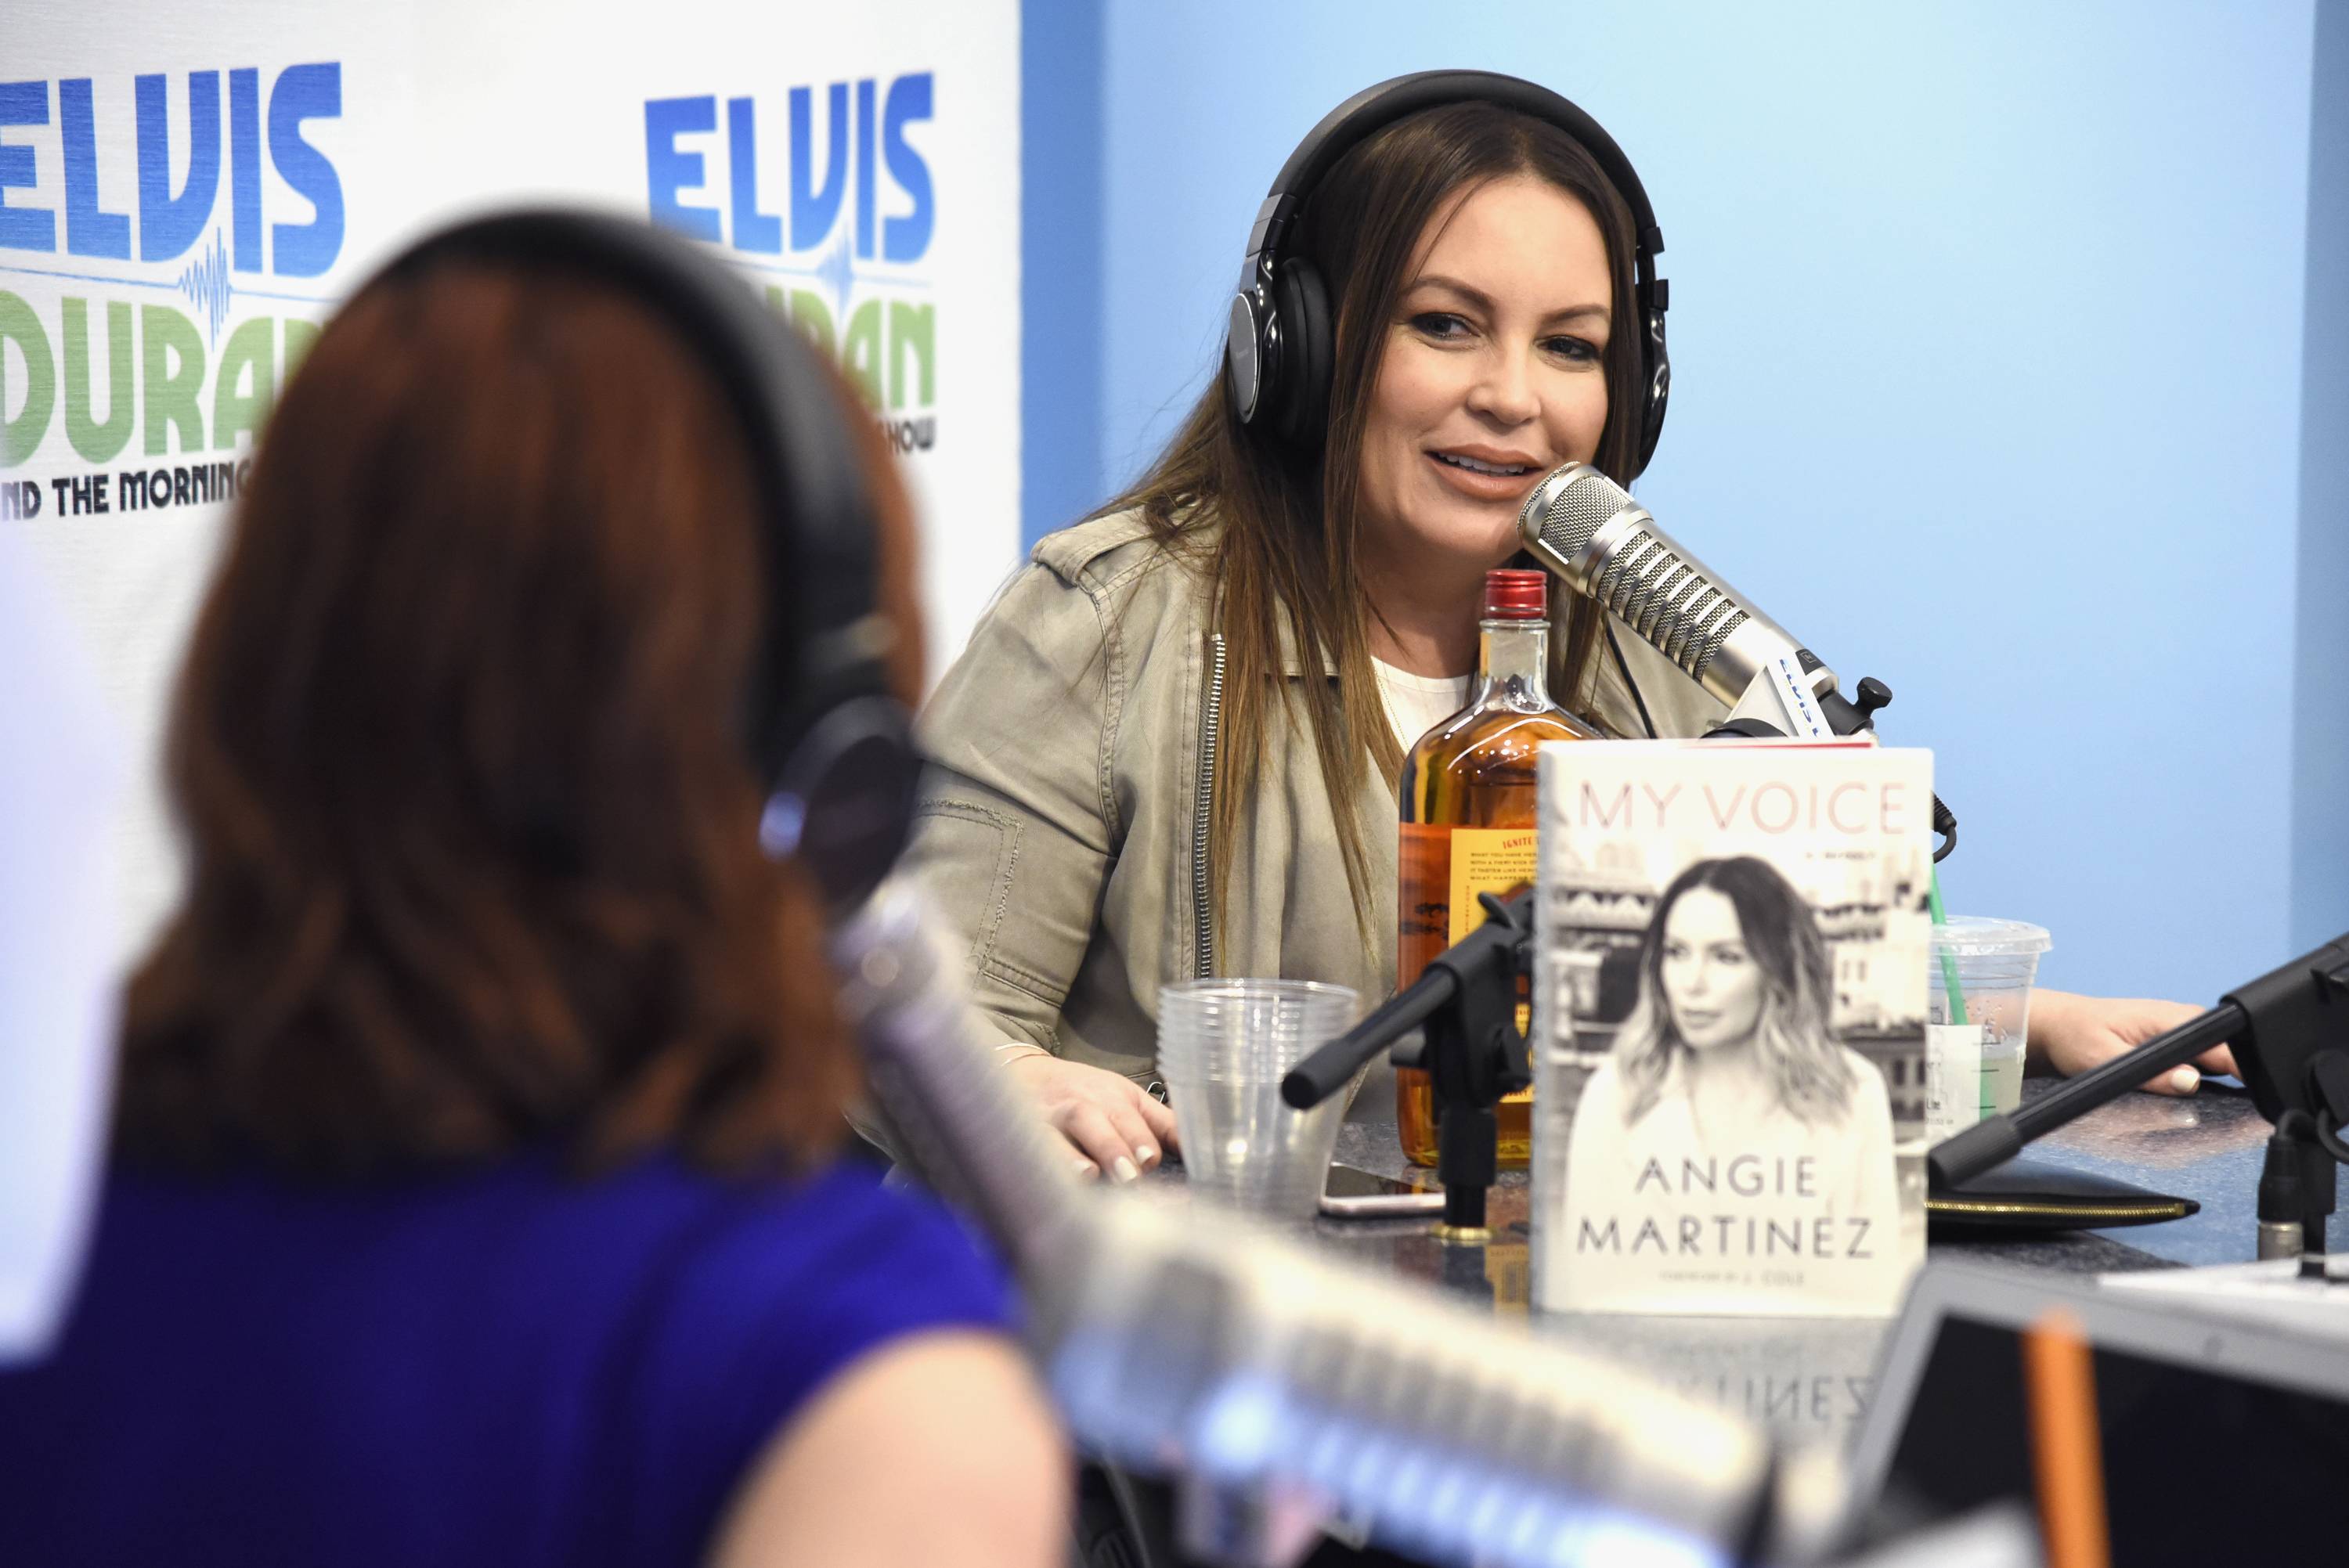 The Voice of NY Tells All - My Voice, the anticipated memoir by one of hip hop's most notorious figures, Angie Martinez, reveals new things about hip-hop’s story. The memoir does read like an intimate history lesson. If you lived during the time of many of the events she touches upon, you get a new angle on those events that transpired. If you didn’t, you’re privileged to get an incredible initial perspective on undocumented moments. All in all, we get to see a new side to Angie Martinez, a figure that very much bridges the gap between hip-hop of yesterday with the hip-hop of today. — Jon Reyes&nbsp;(Photo: Matthew Eisman/Getty Images)